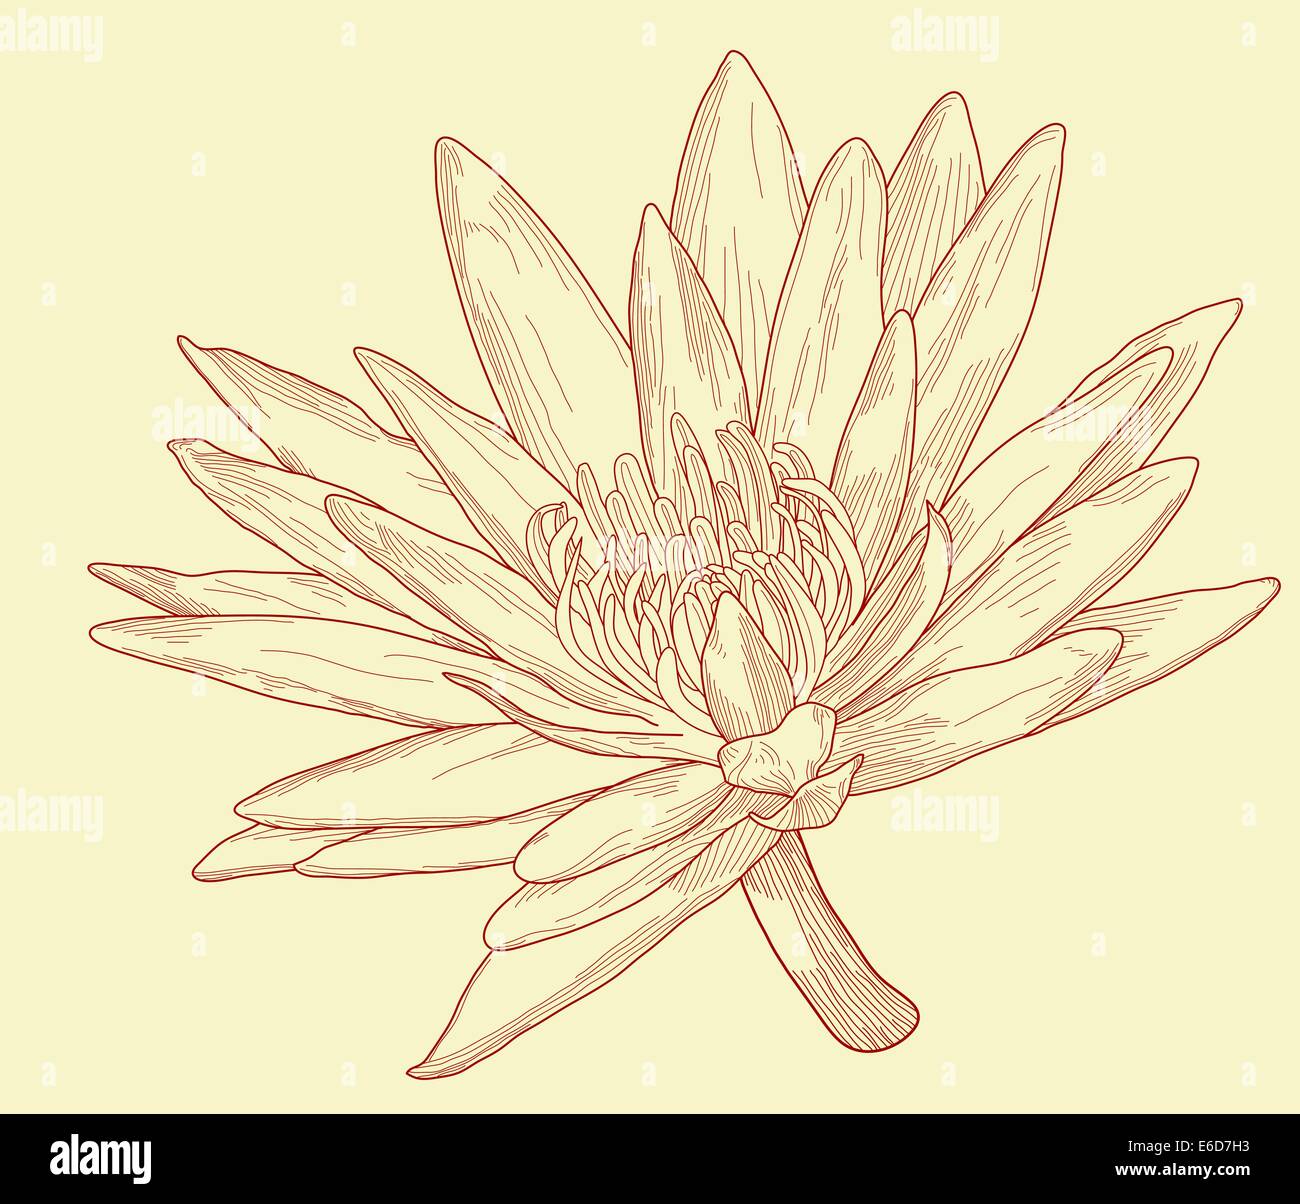 Editable vector illustration of a water lily flower Stock Vector